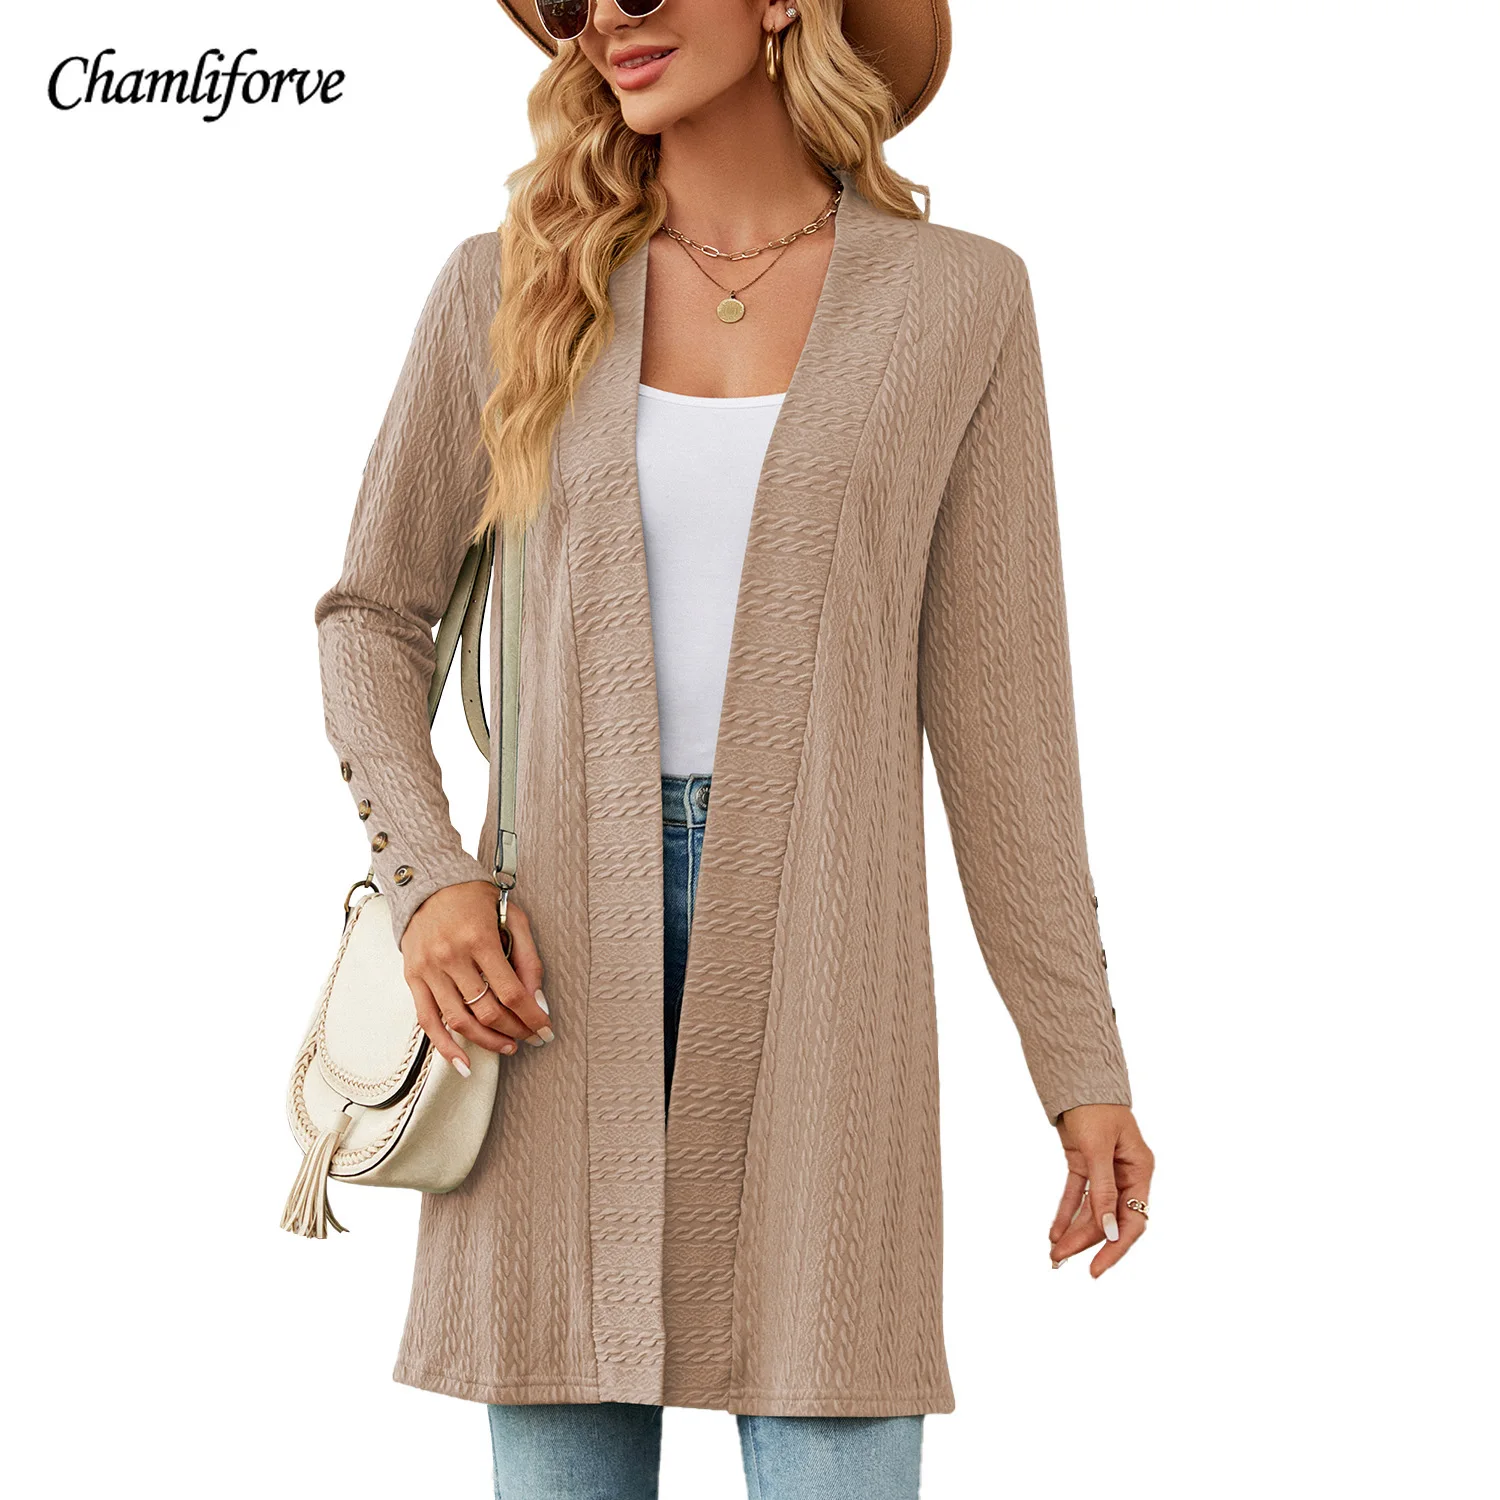 chamliforve 2023 autumn and winter new solid color button long sleeve loose cardigan coat for women coat women winter jacket chamliforve 2023 autumn and winter new solid color button long sleeve loose cardigan coat for women coat women winter jacket